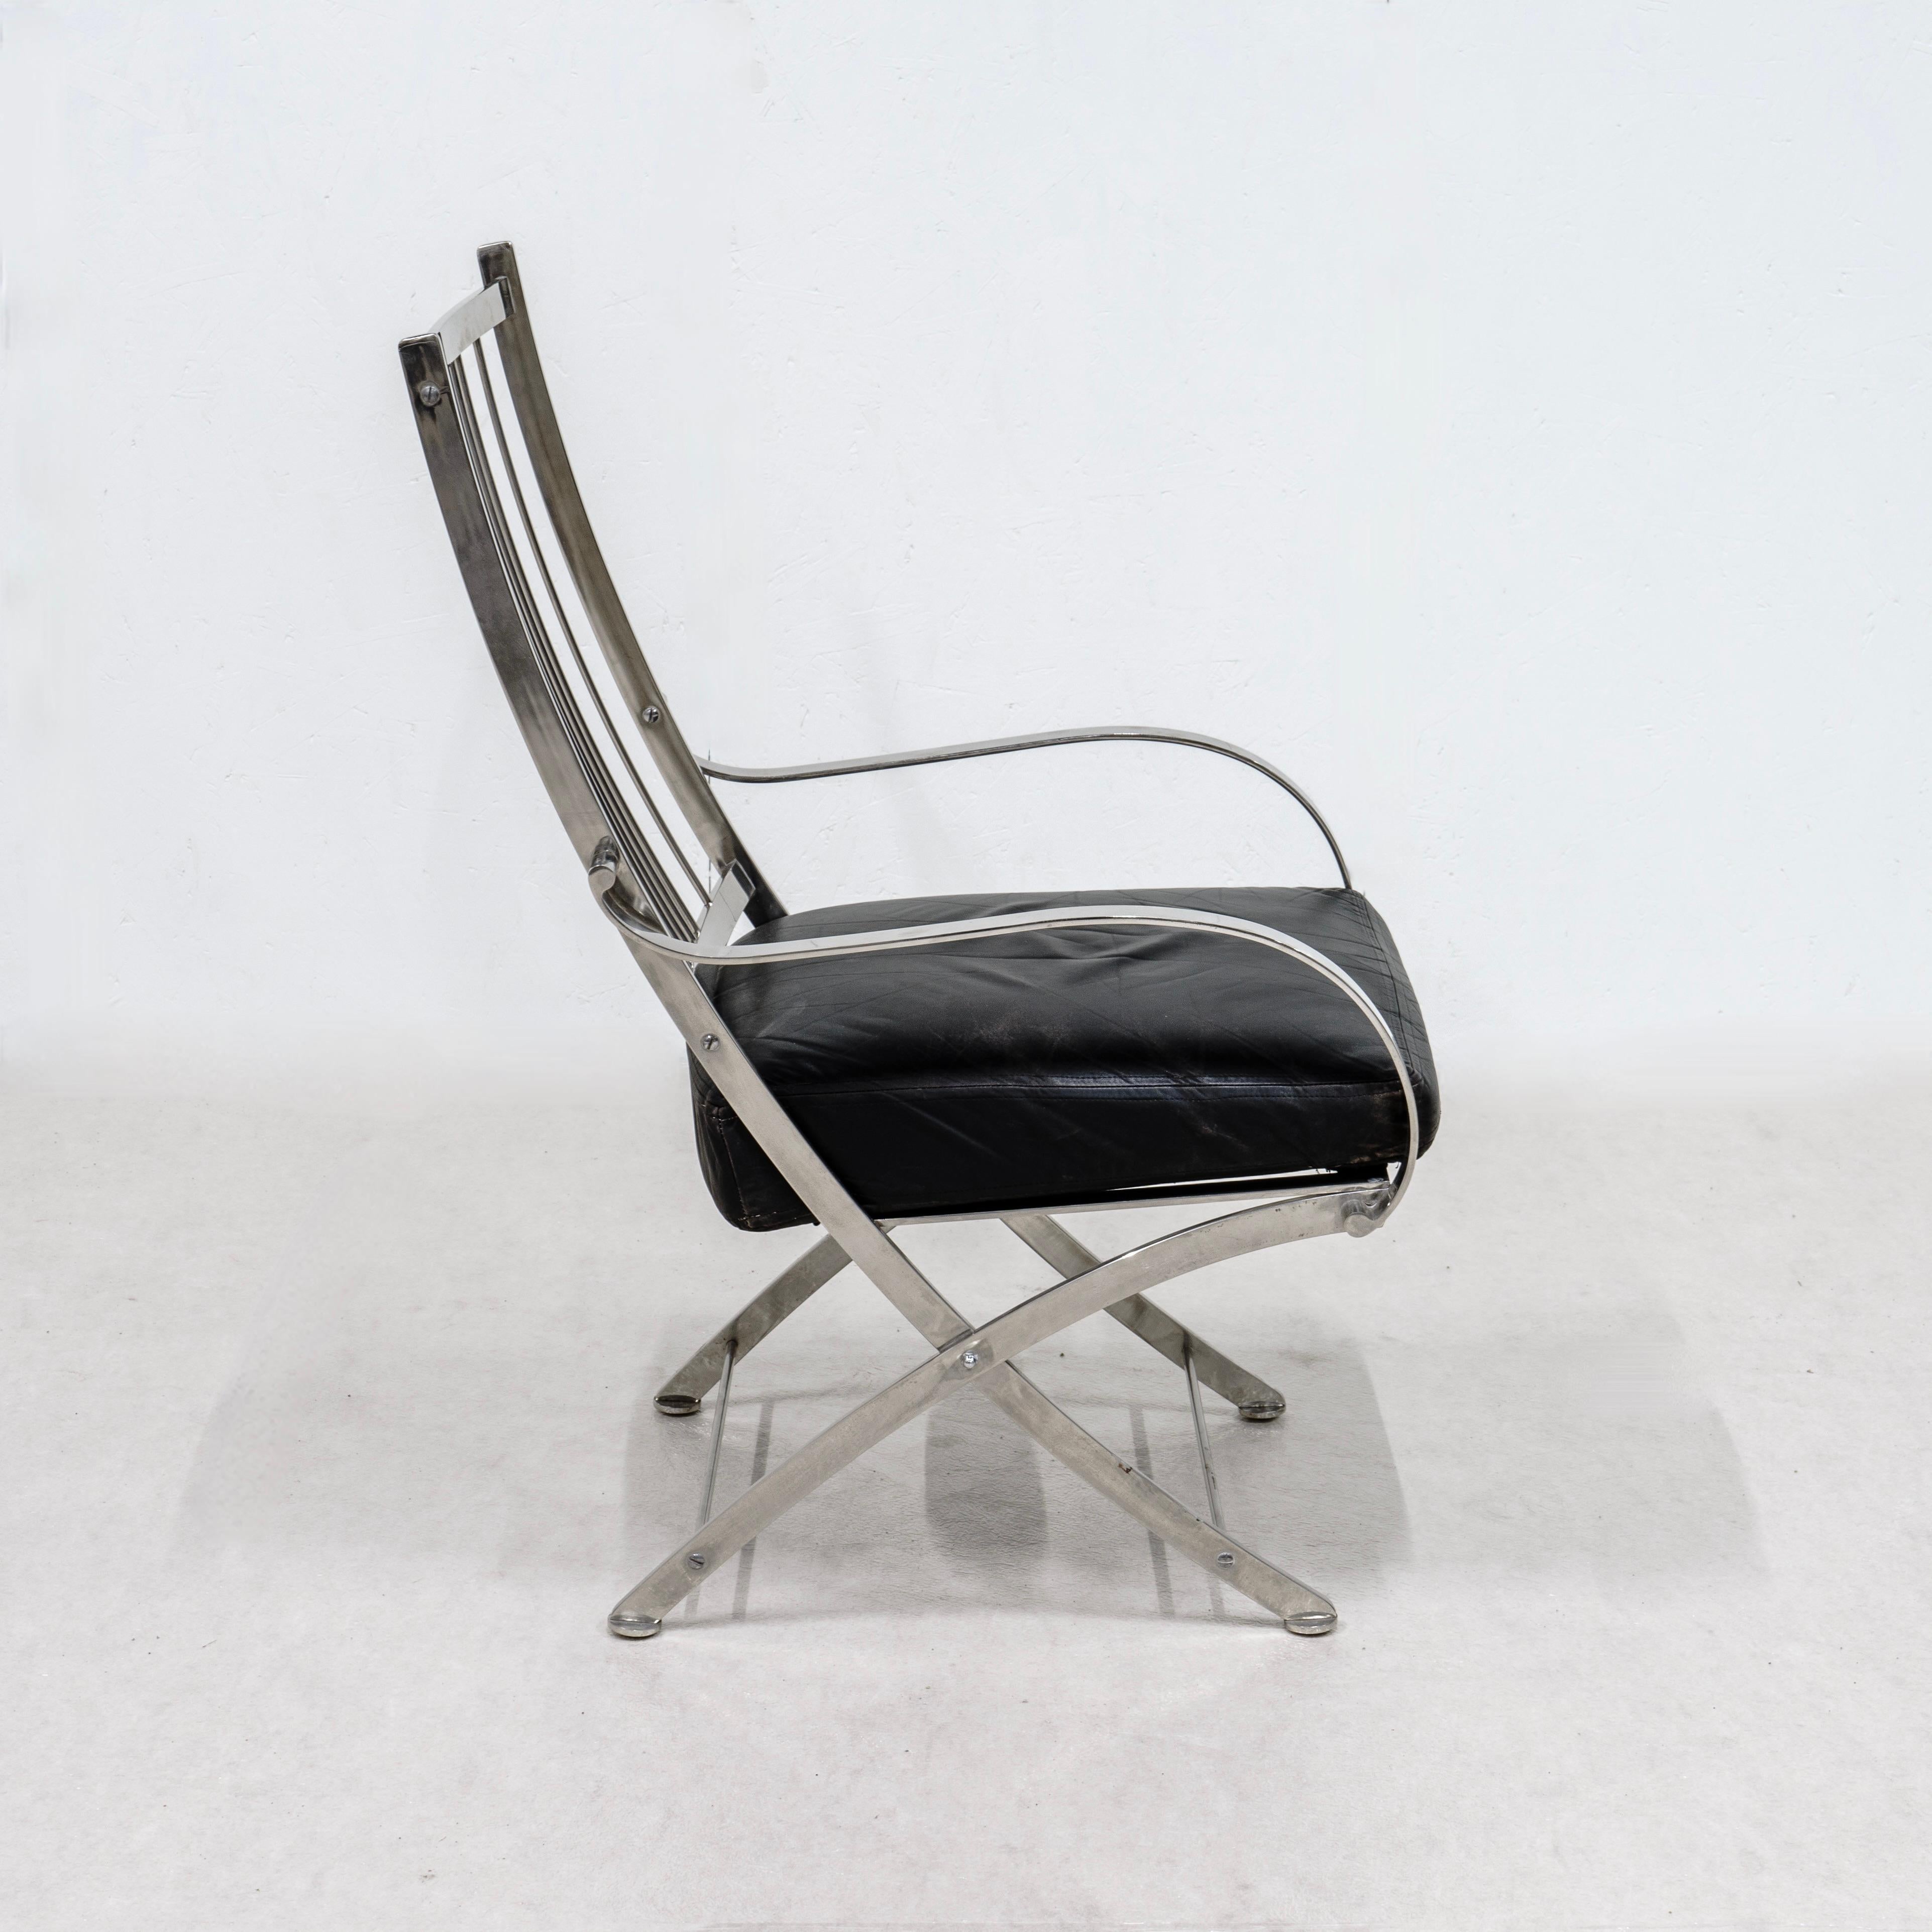 An armchair in chromed steel, seat in black leather, and its ottoman. House of Jansen, France, 1980s.

38,18x21,65x27,55 Seat
18,11 ottoman
18,11x19,68x17,71